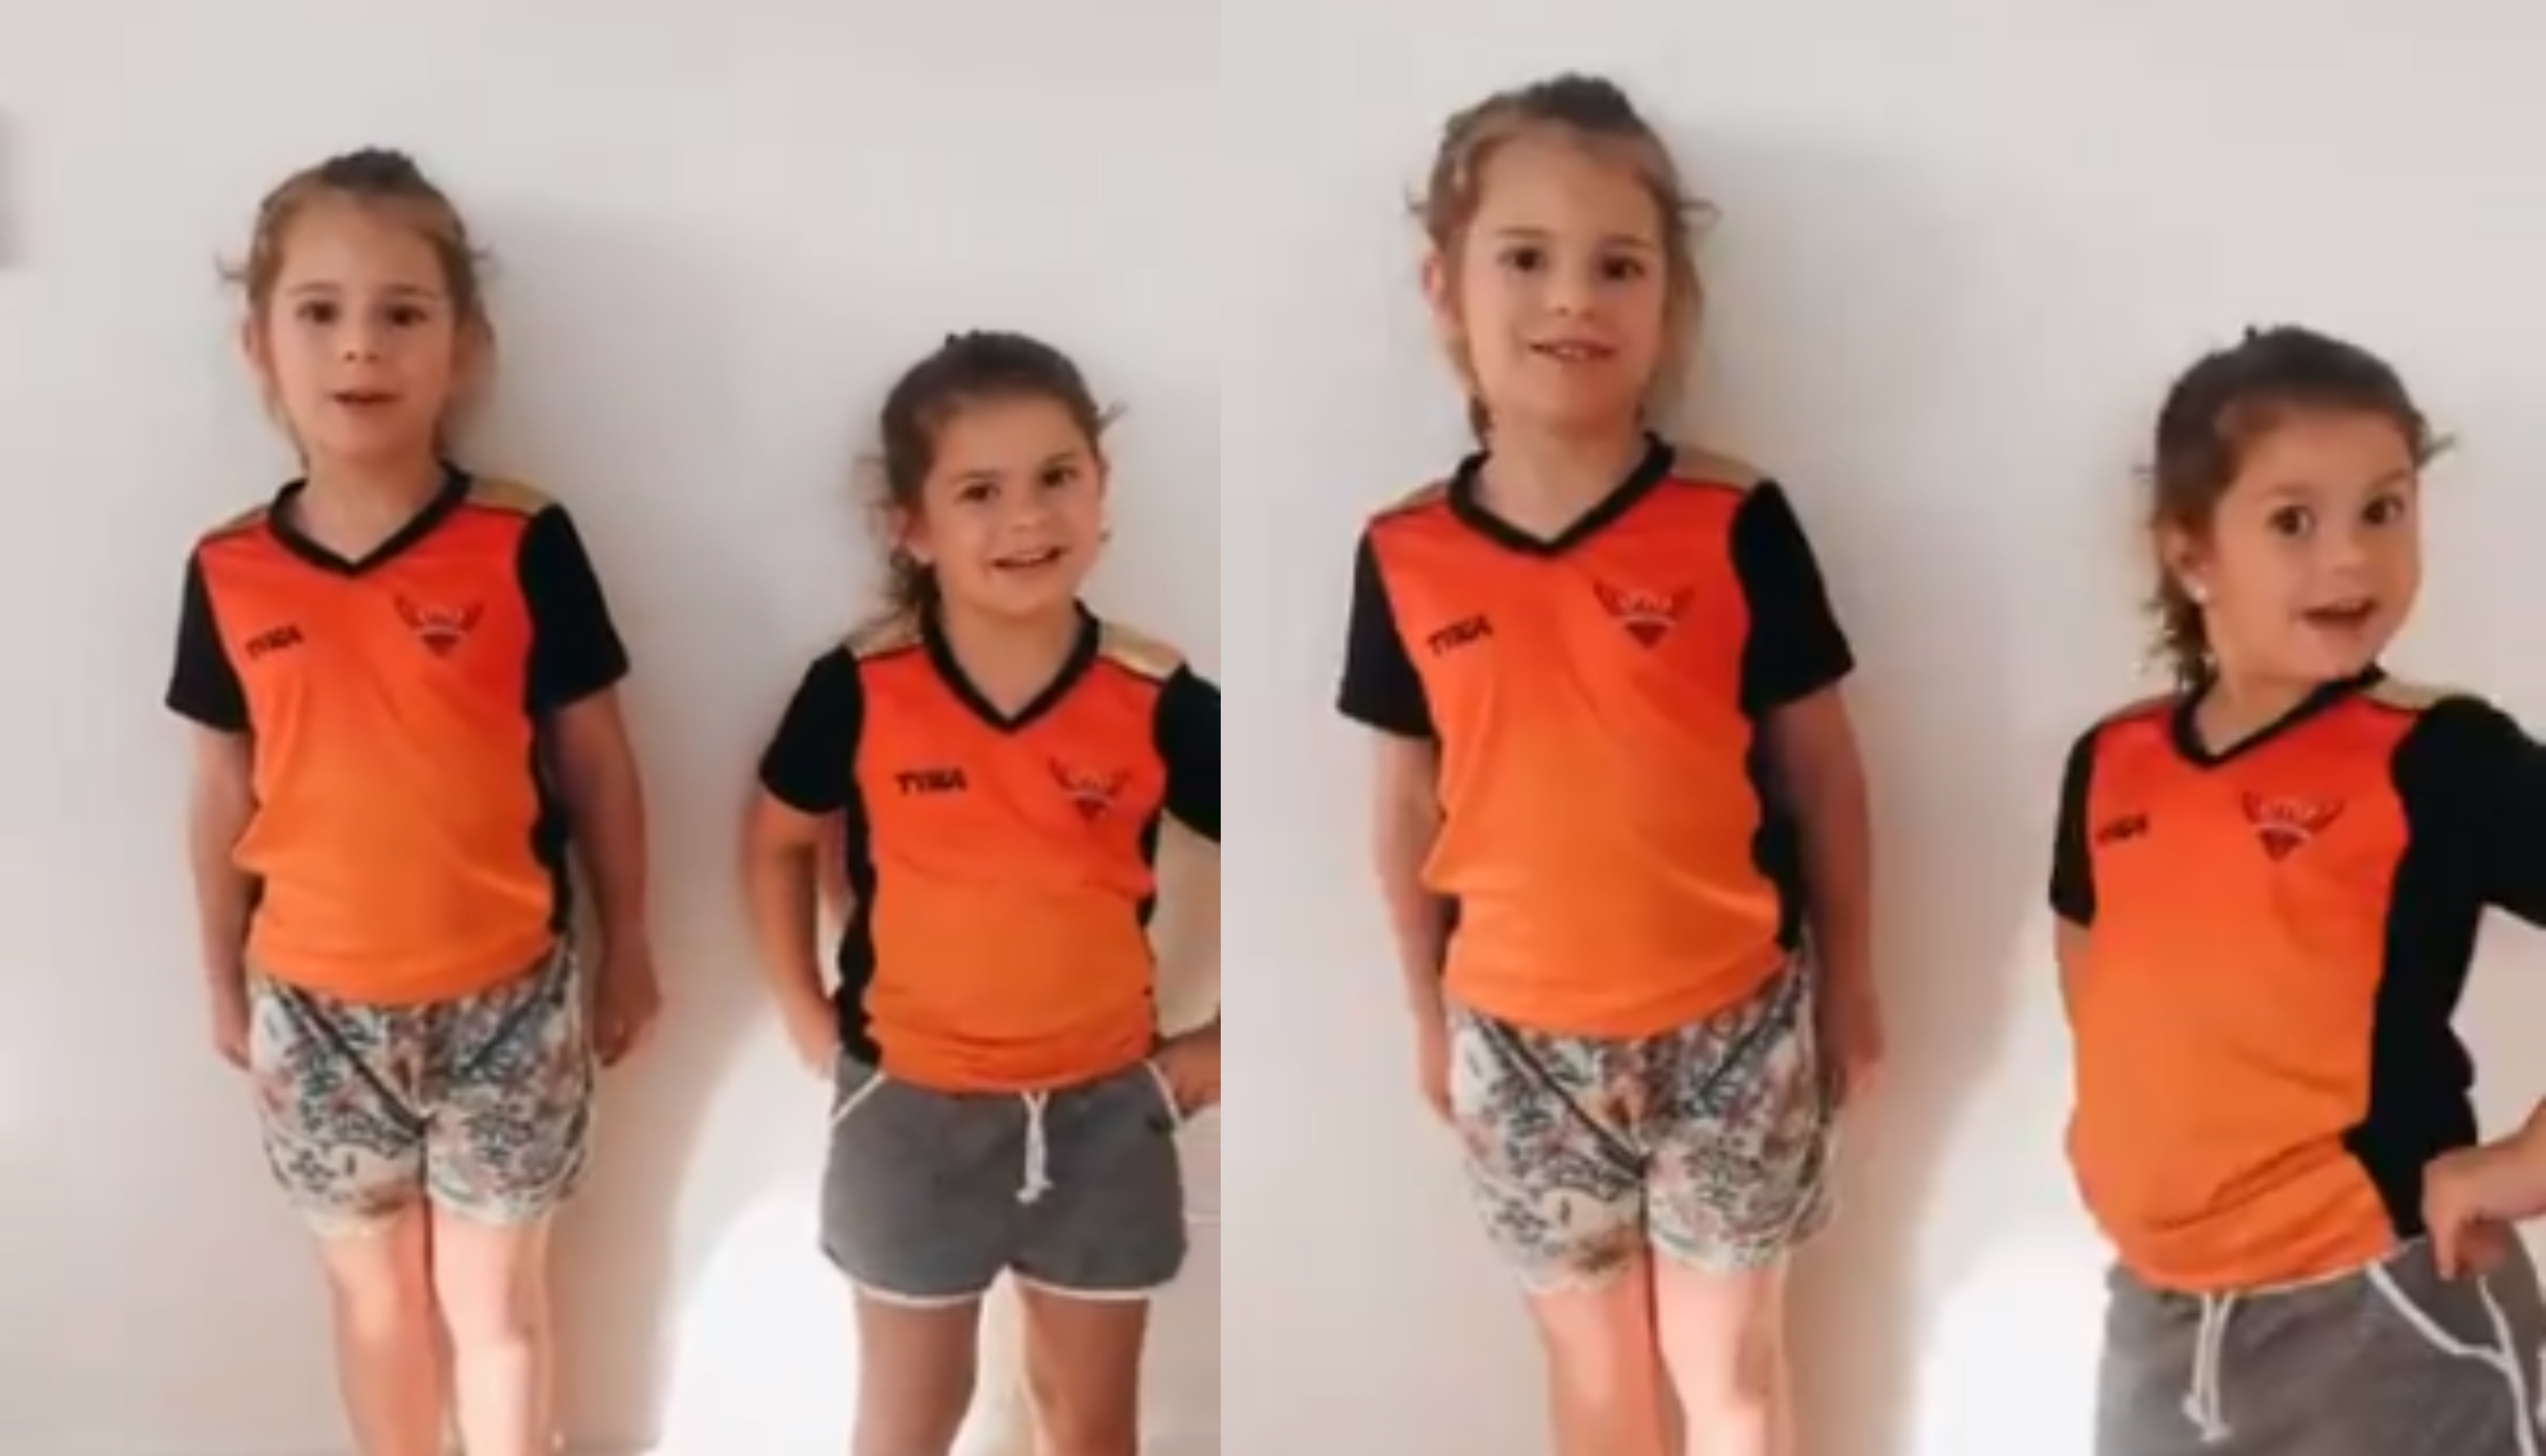 David Warner's daughters wished good luck to SRH | Twitter